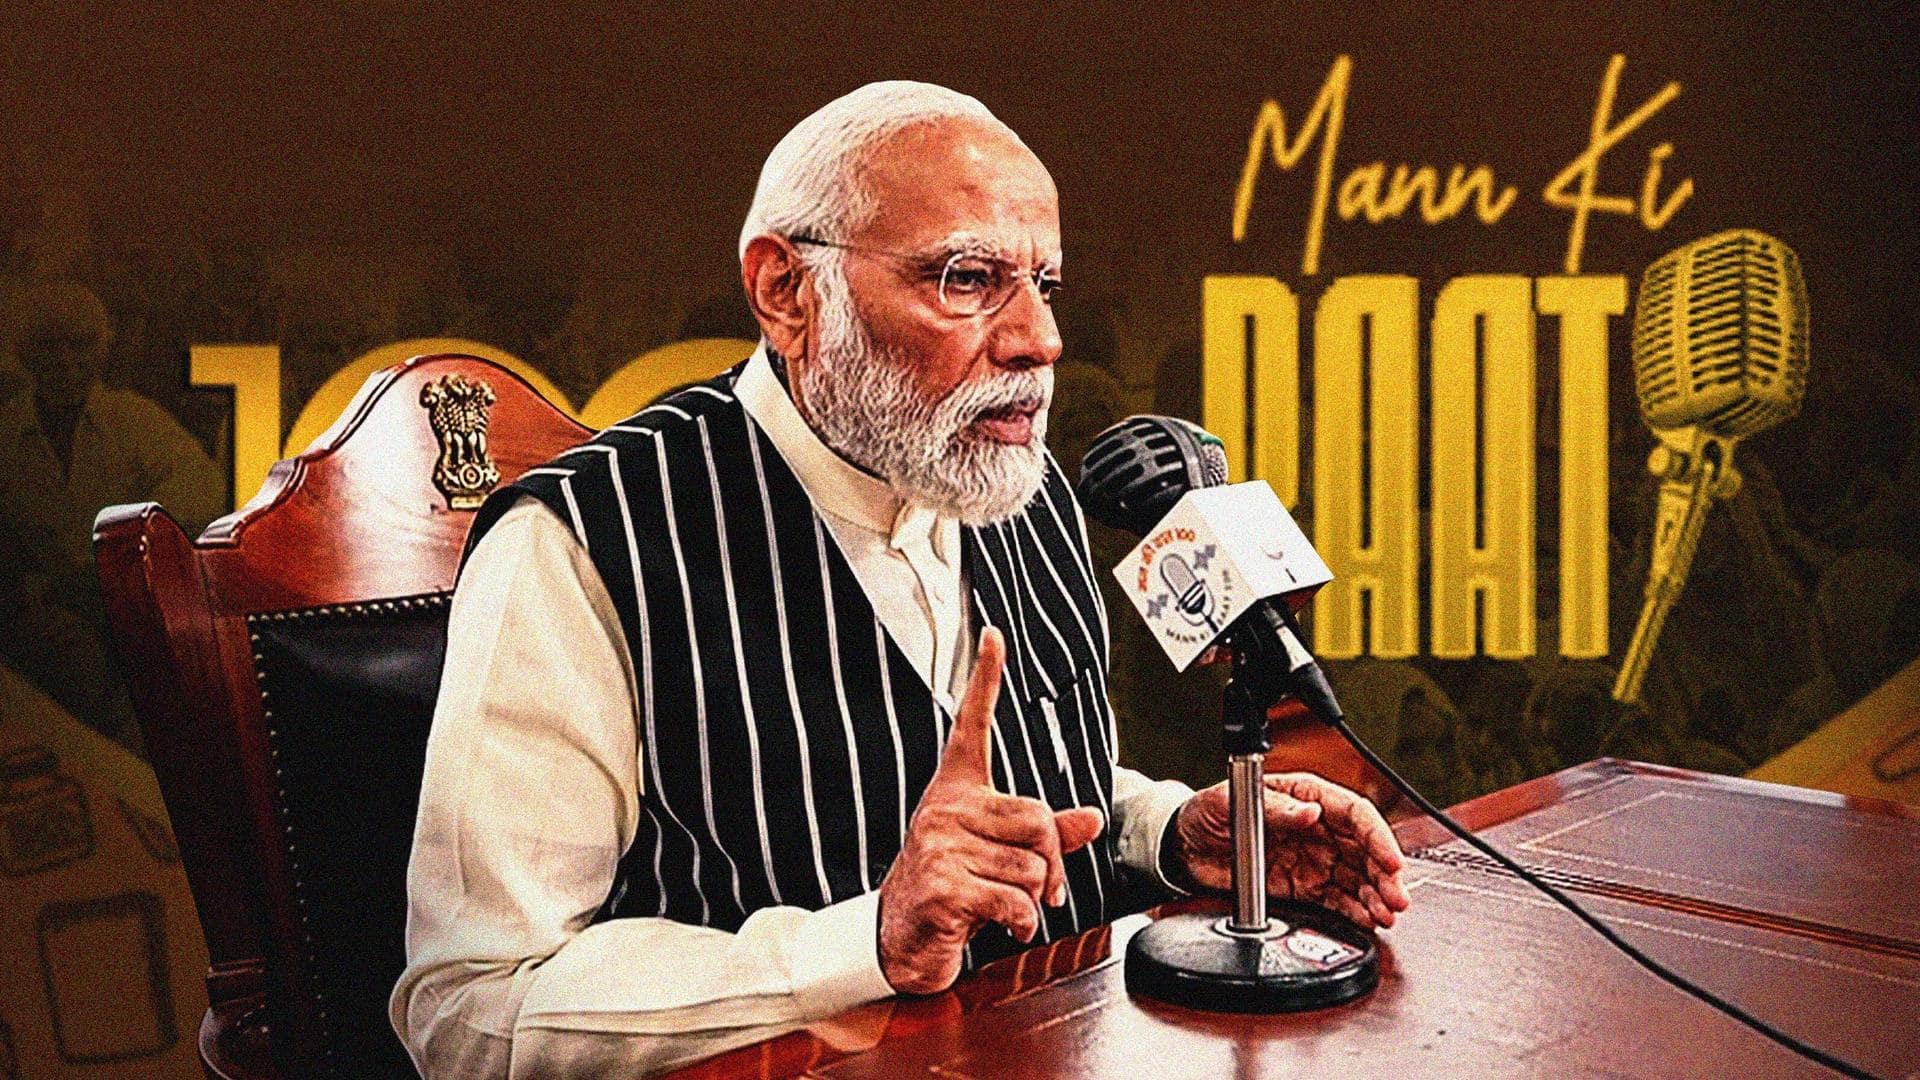 #MannKiBaat: Modi's 100th radio address going global with special broadcasts